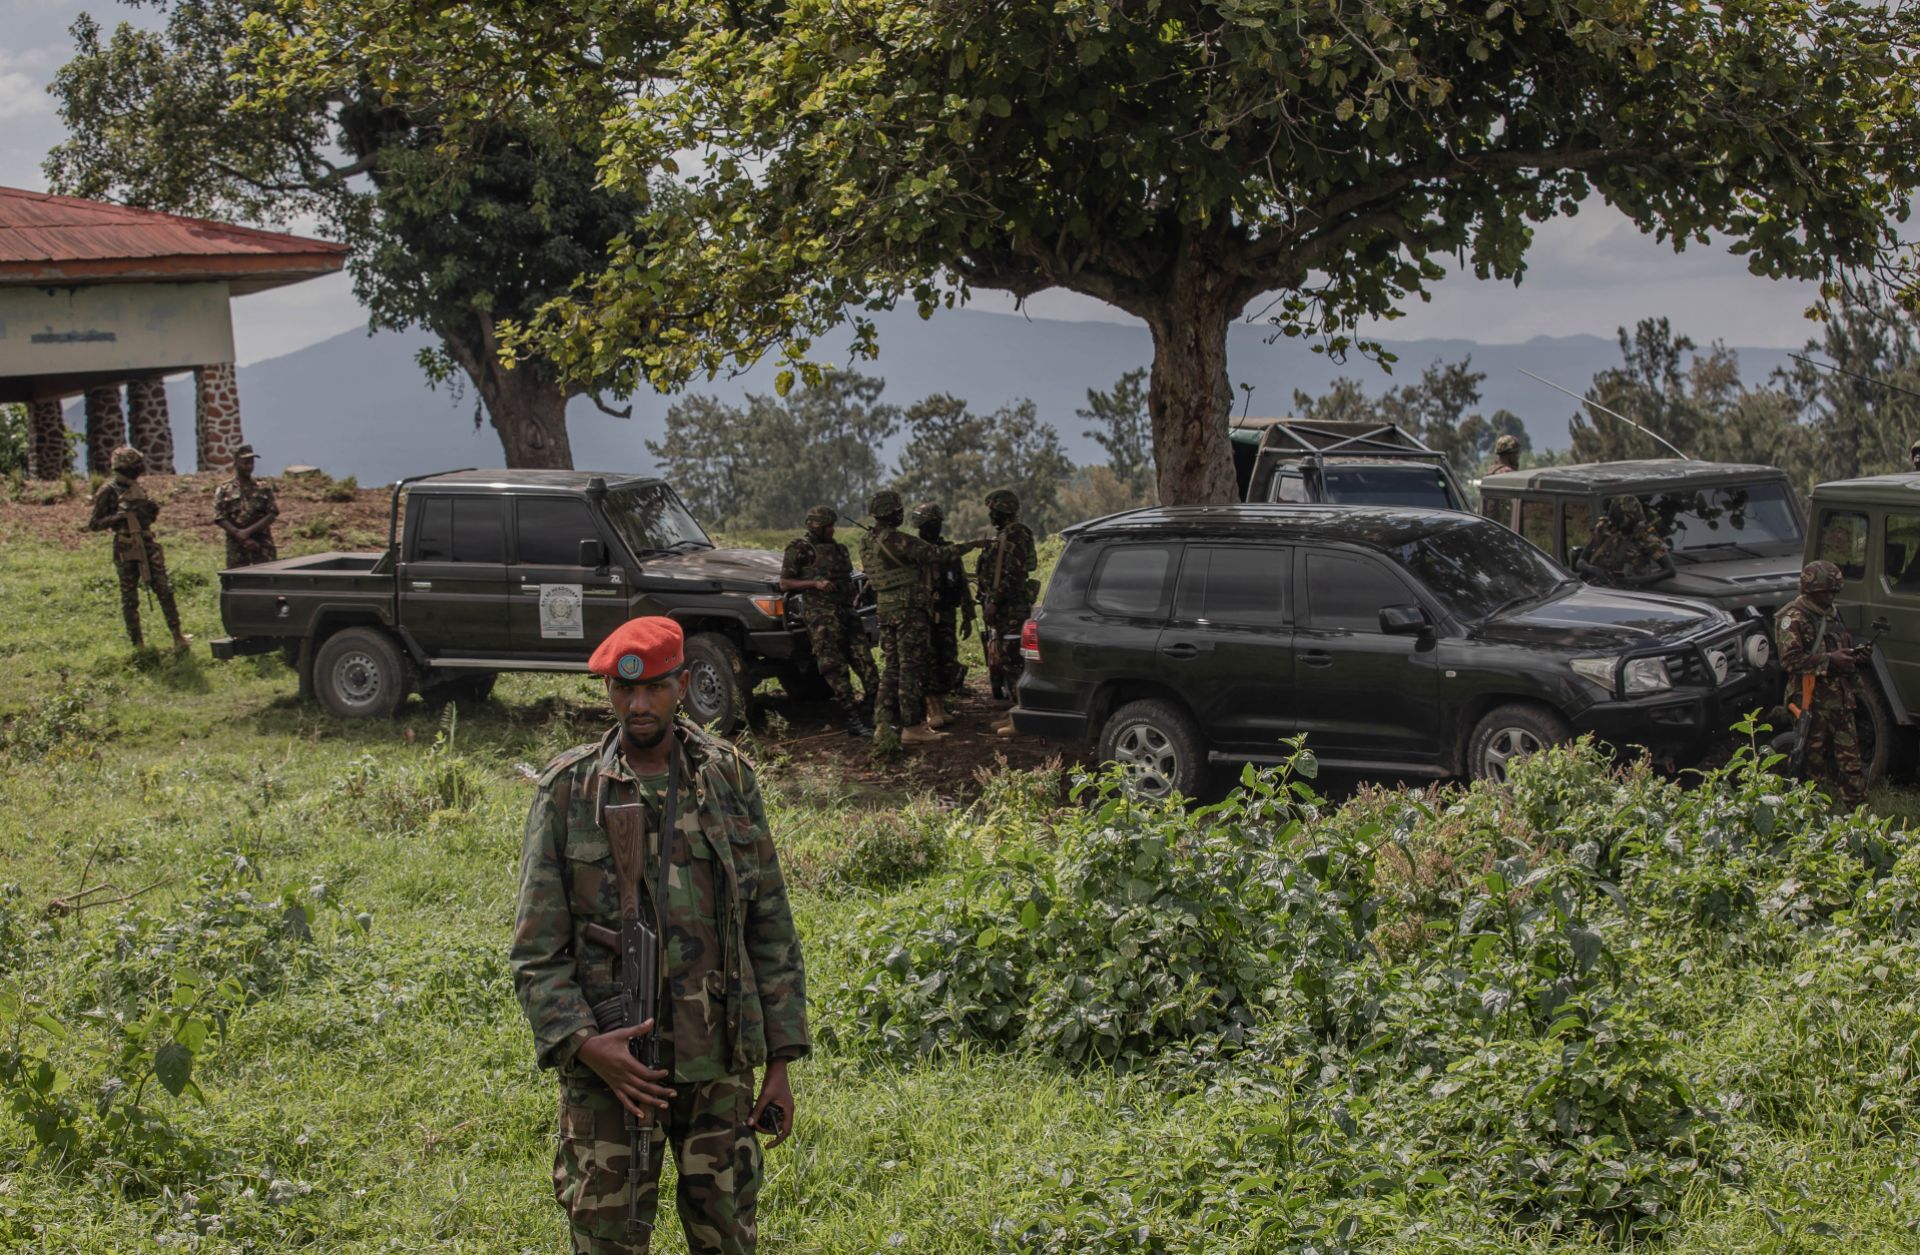 M23 fighters guard the area during a meeting between the rebel group and East African Regional Force (EACRF) officials at the Rumangabo camp in eastern Democratic Republic of Congo on Jan. 6, 2023.